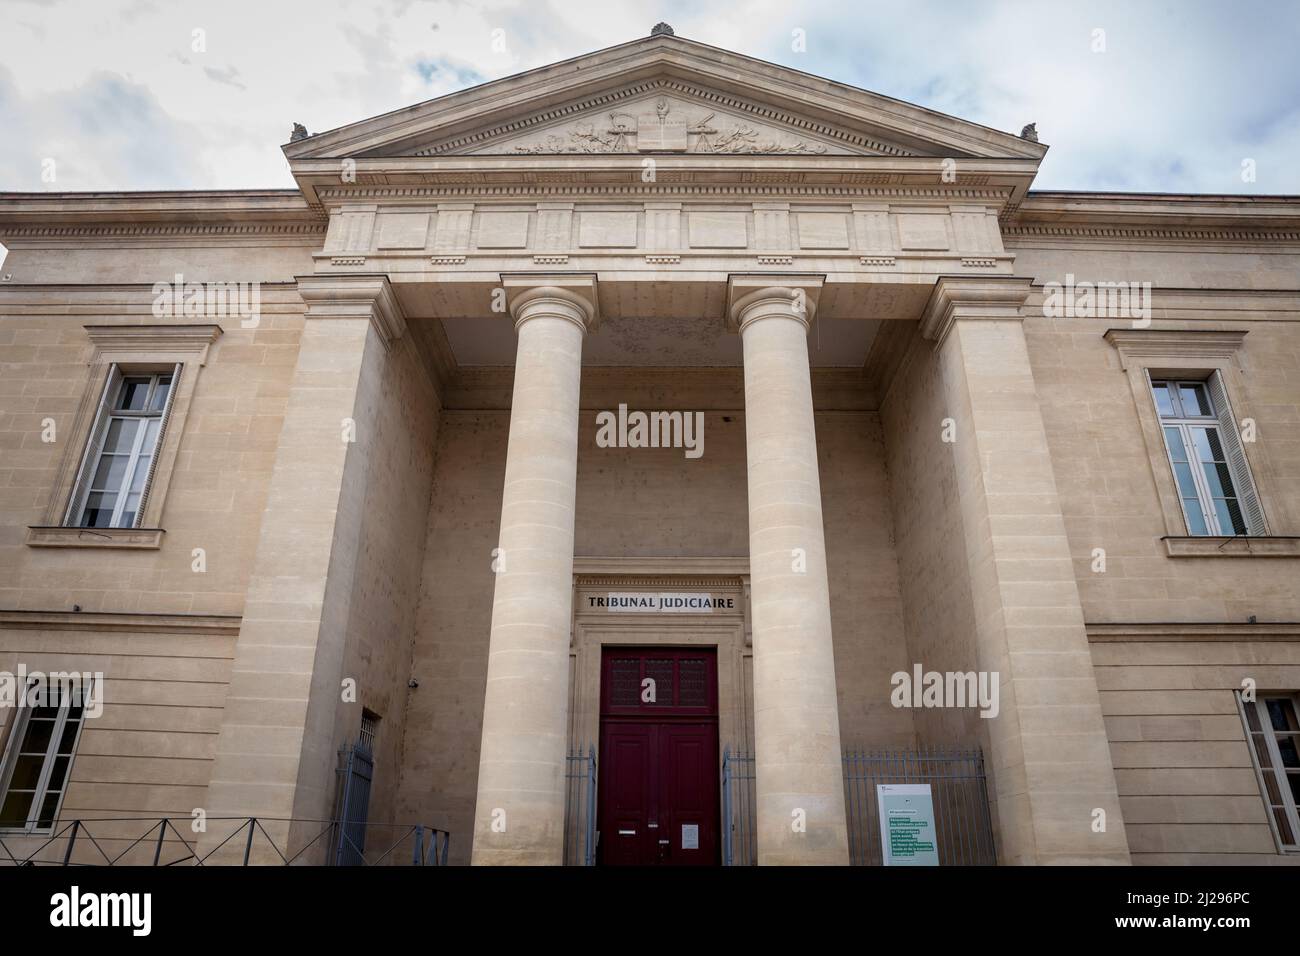 Picture of the Bergerac Tribunal Judiciaire, formerly known as Tribunal de Police and Tribunal de Grande Instance. Tribunal Judiciaire is the French c Stock Photo